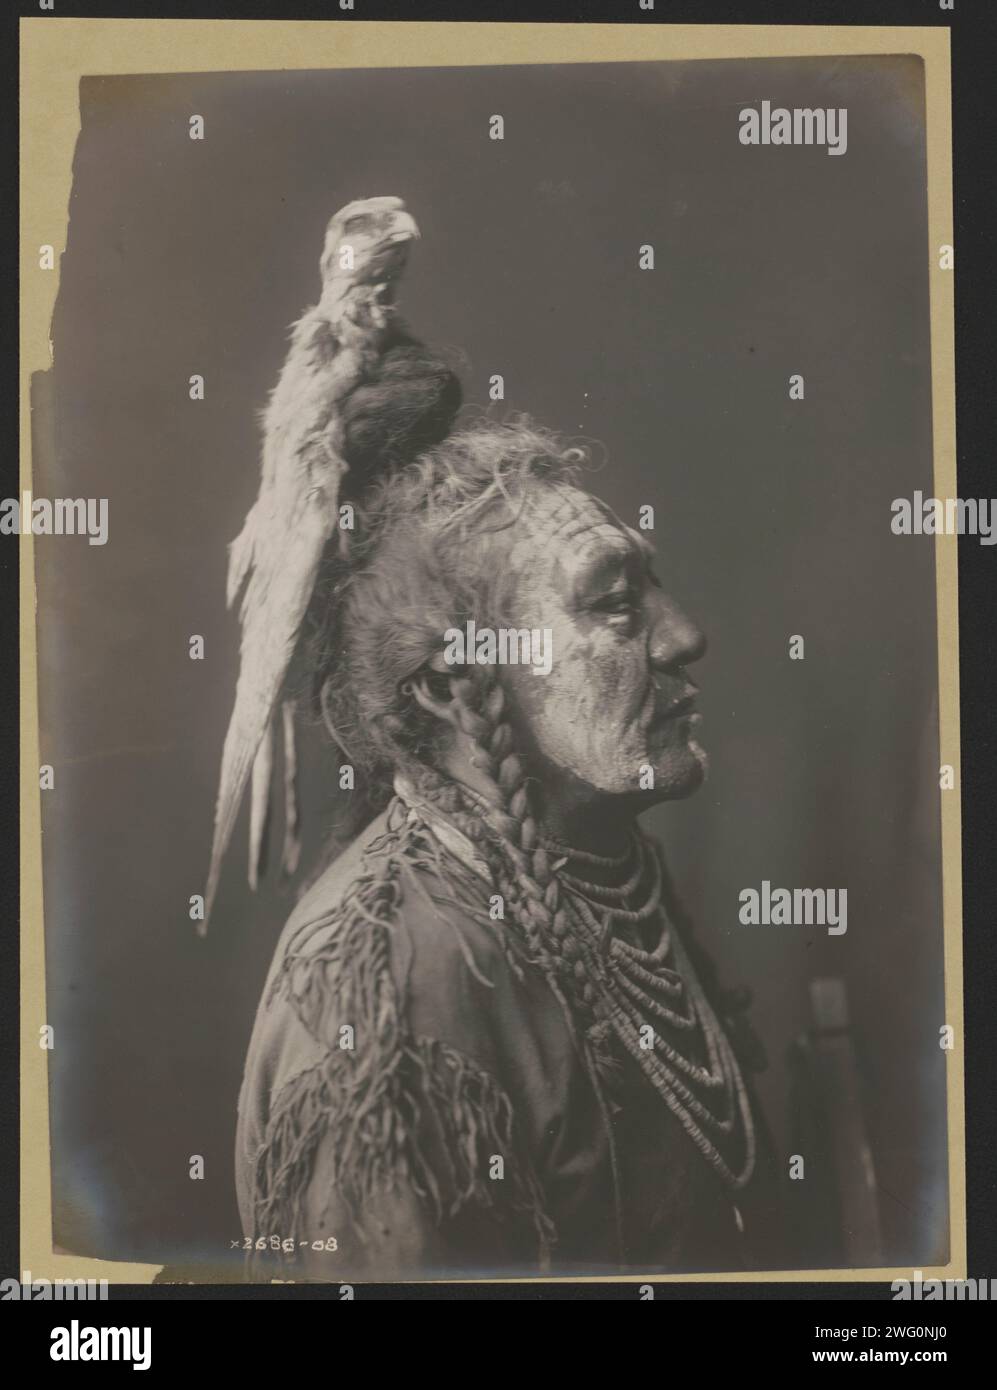 Two Whistles [A]-Apsaroke, c1908. Photograph shows Two Whistles, an Apsaroke man, head-and-shoulders portrait, right profile, face painted, wearing medicine hawk headdress, buckskin shirt, and shell necklaces. Stock Photo